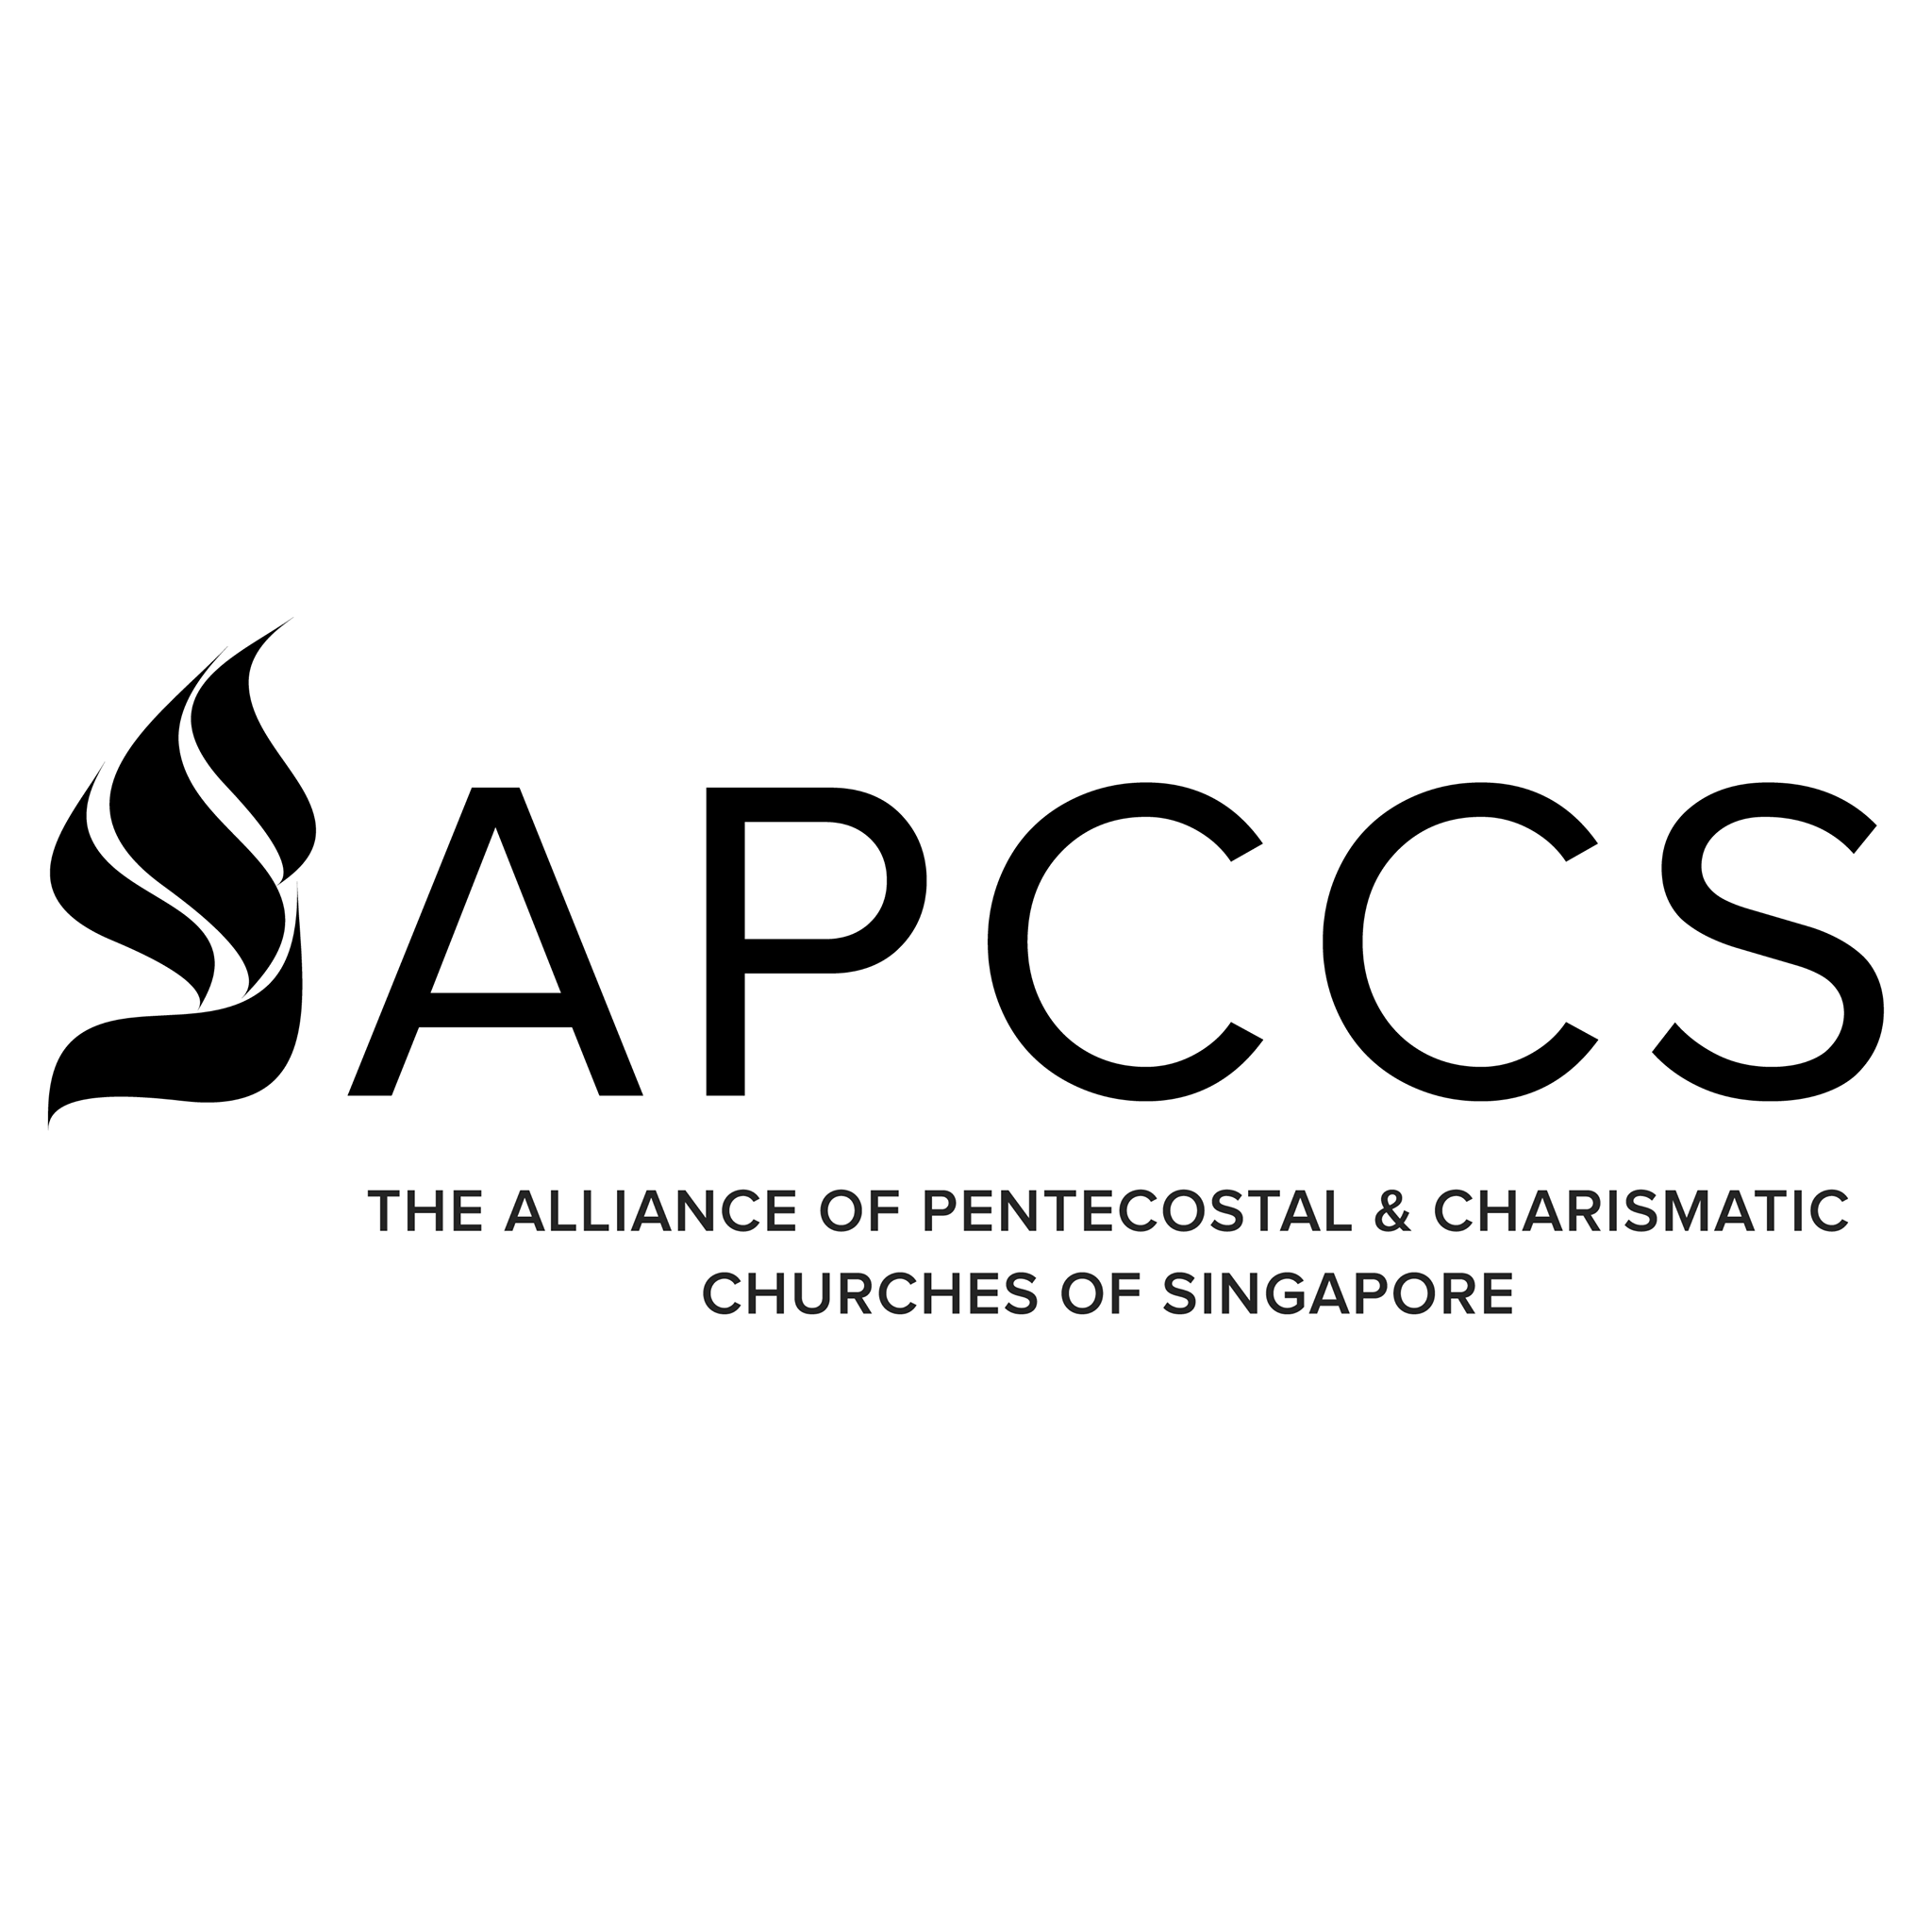 The Alliance of Pentecostal & Charismatic Churches of Singapore